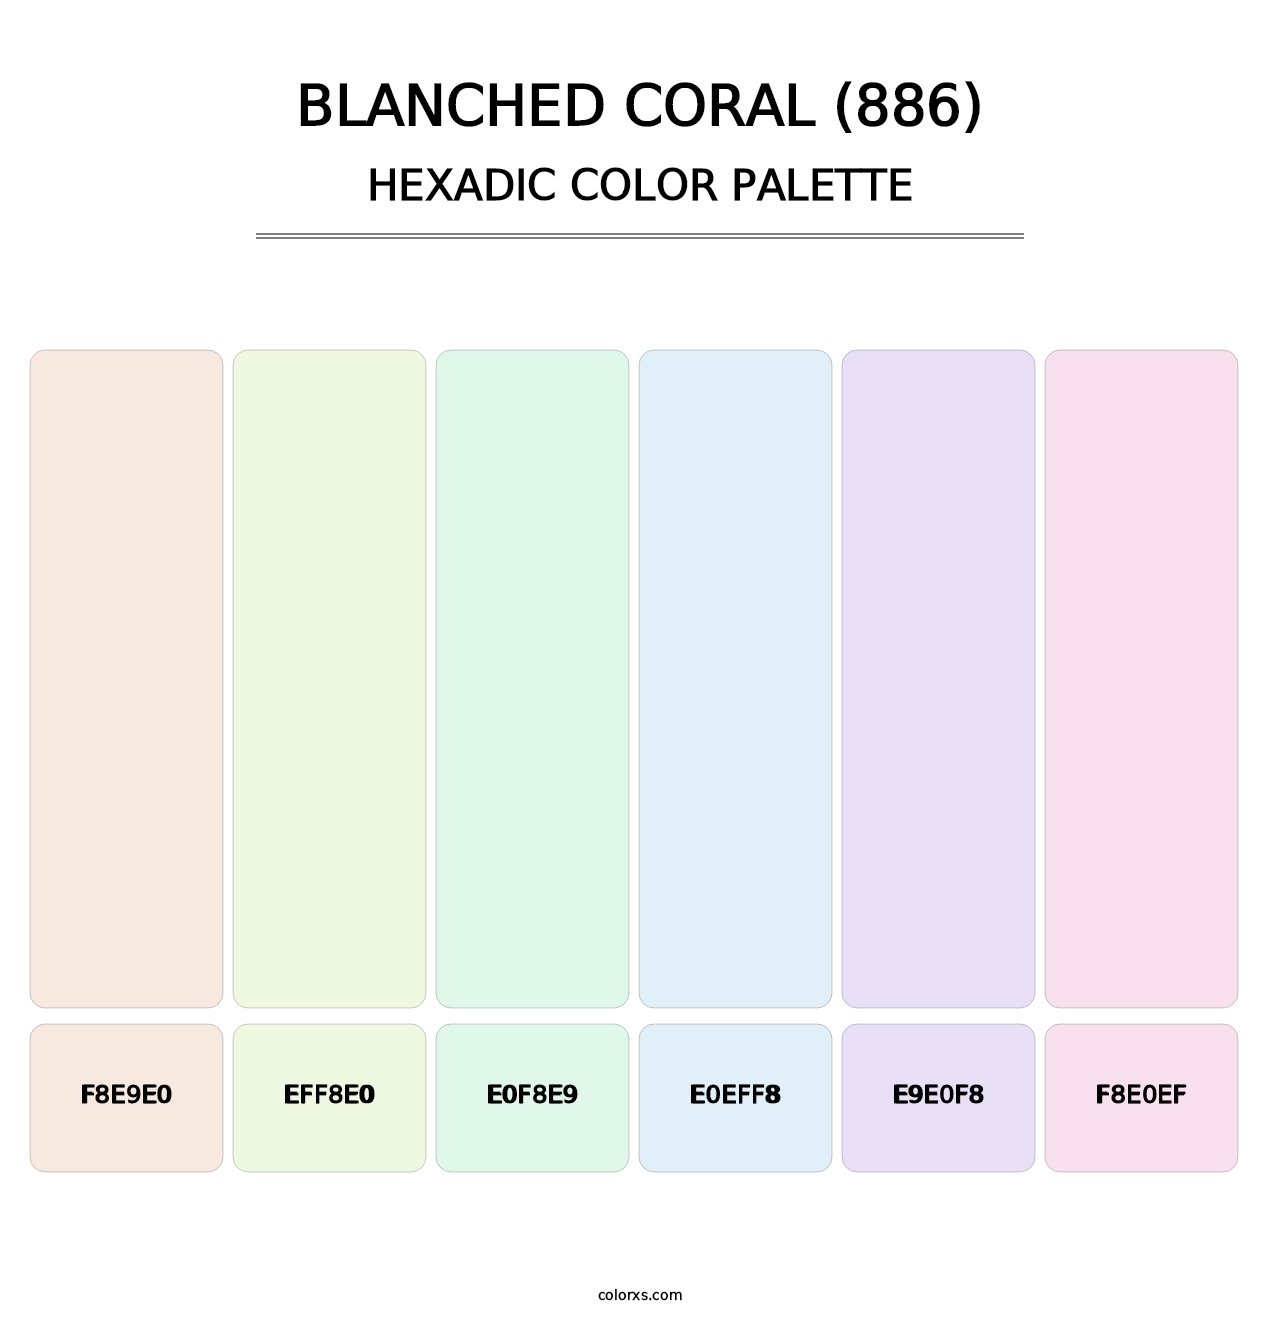 Blanched Coral (886) - Hexadic Color Palette